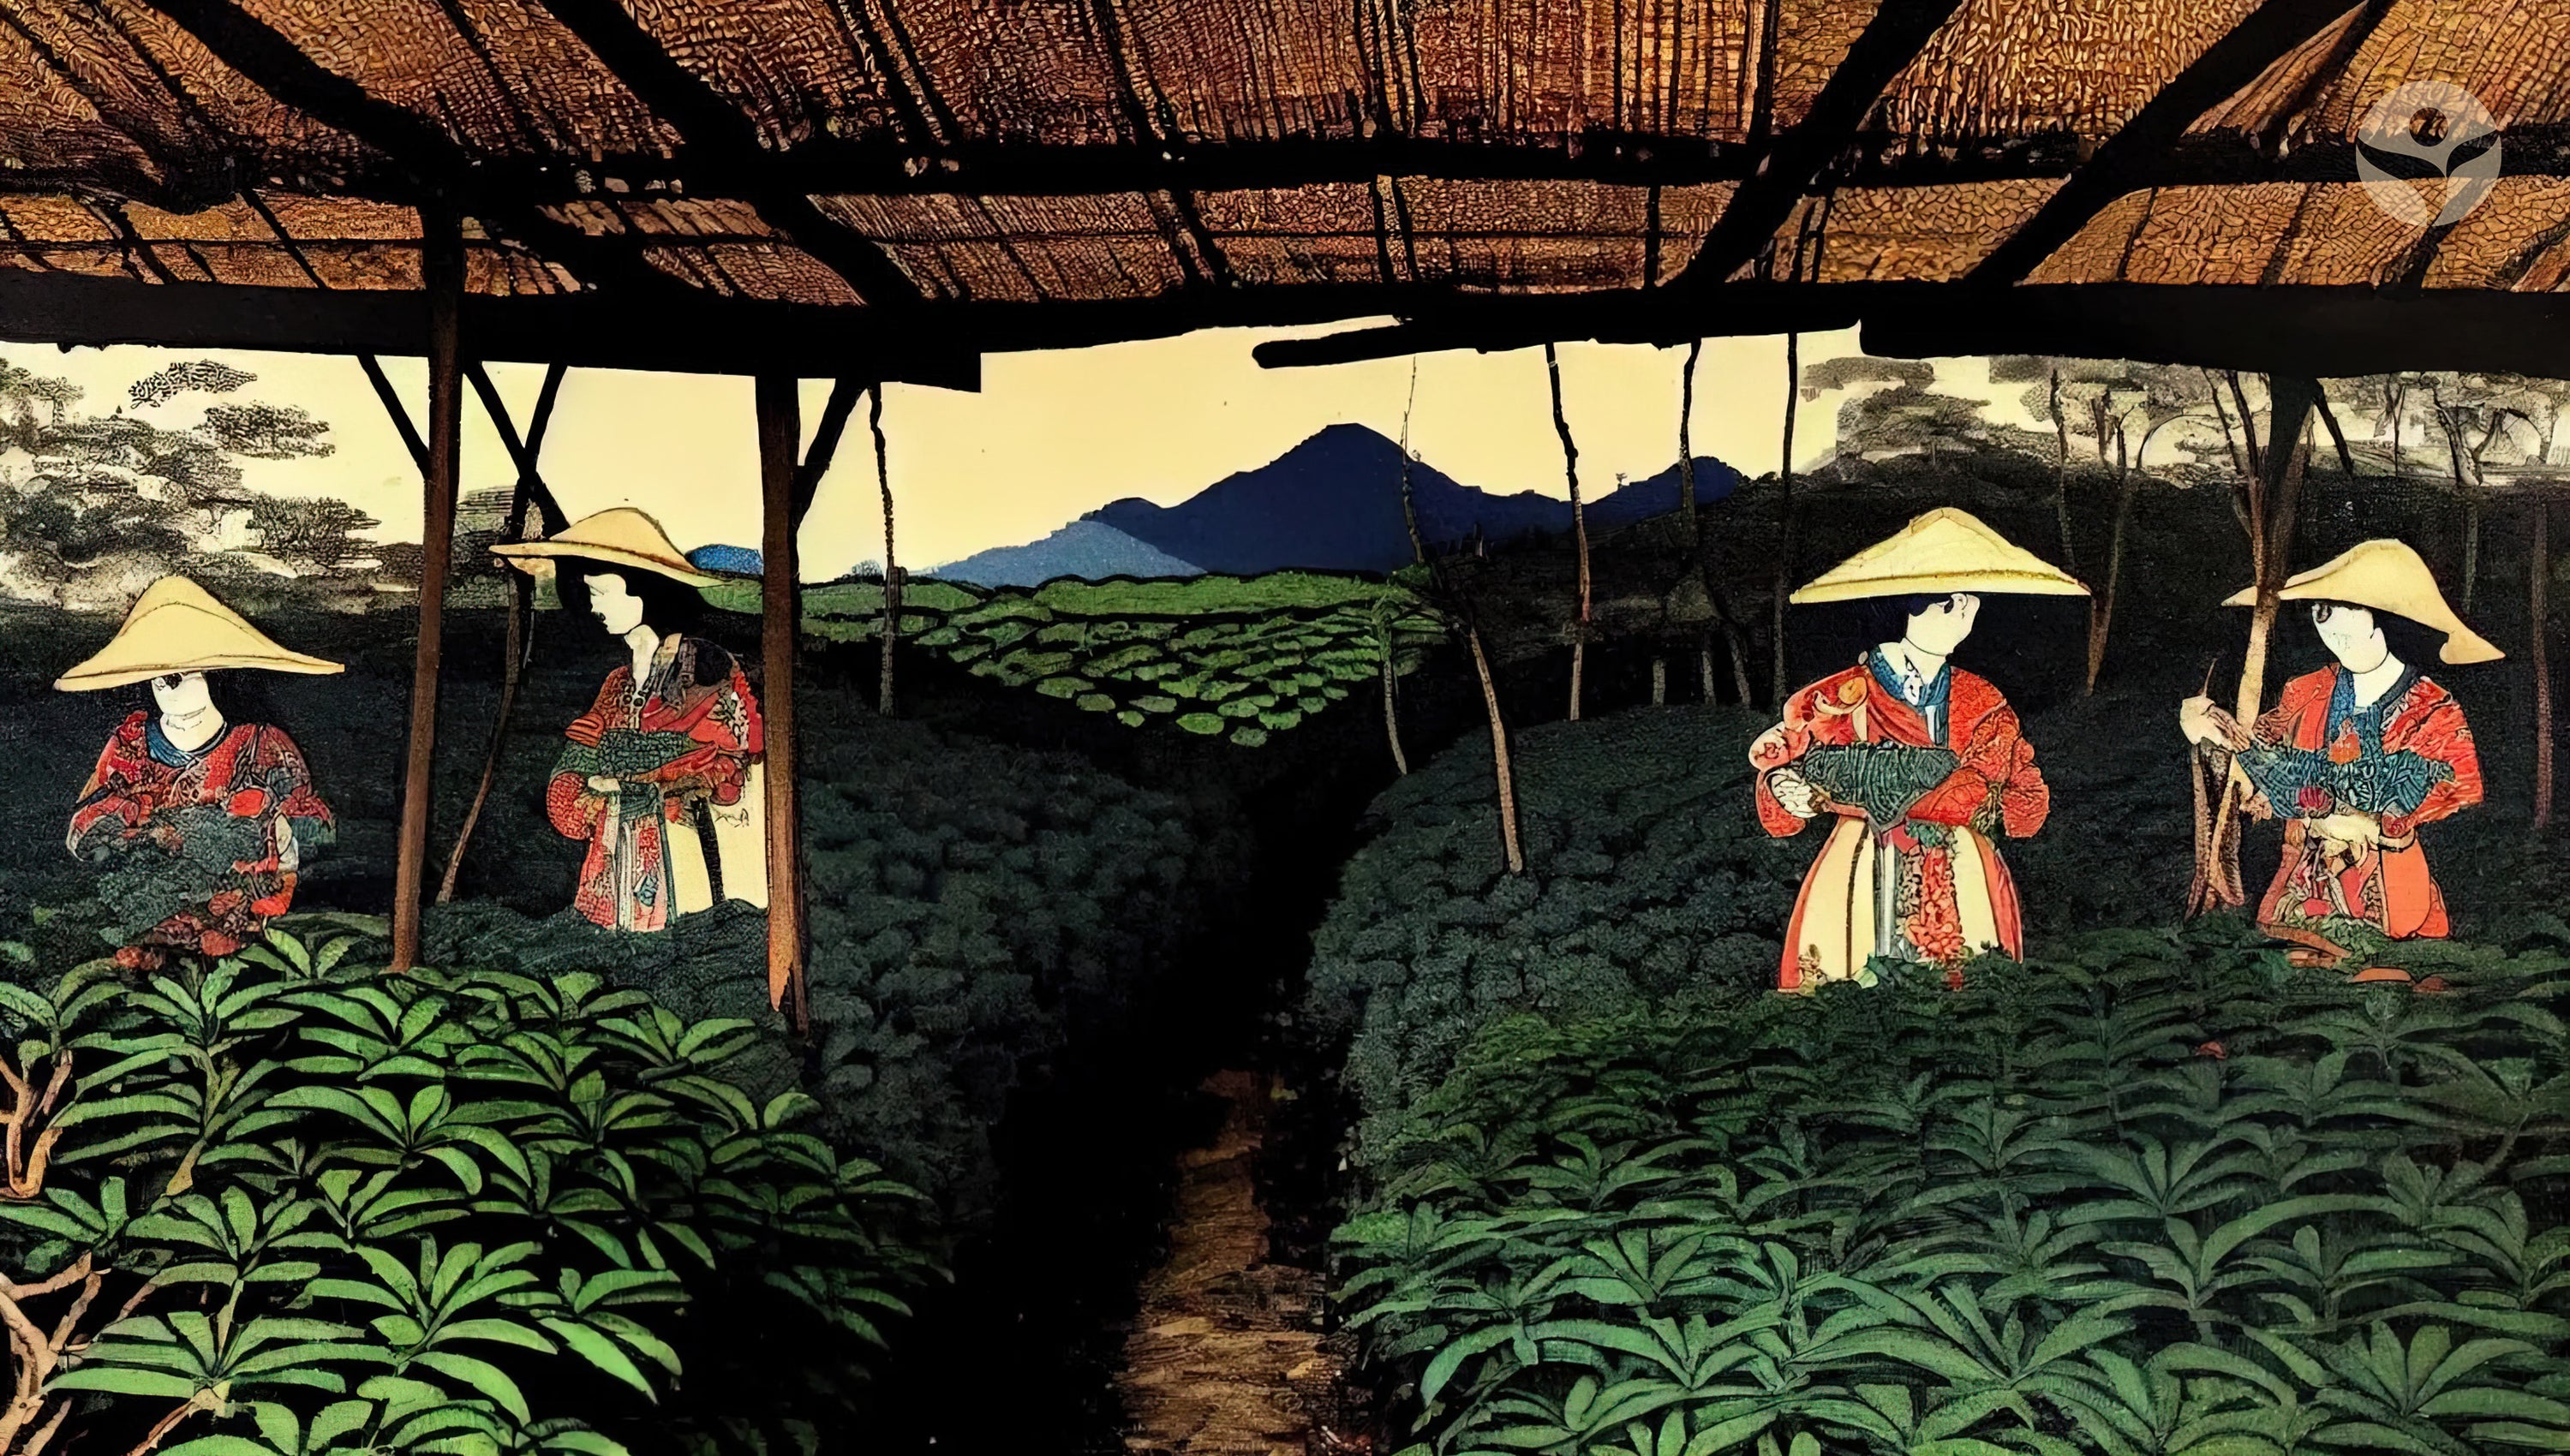 Ancient tea pickers under a shaded roof